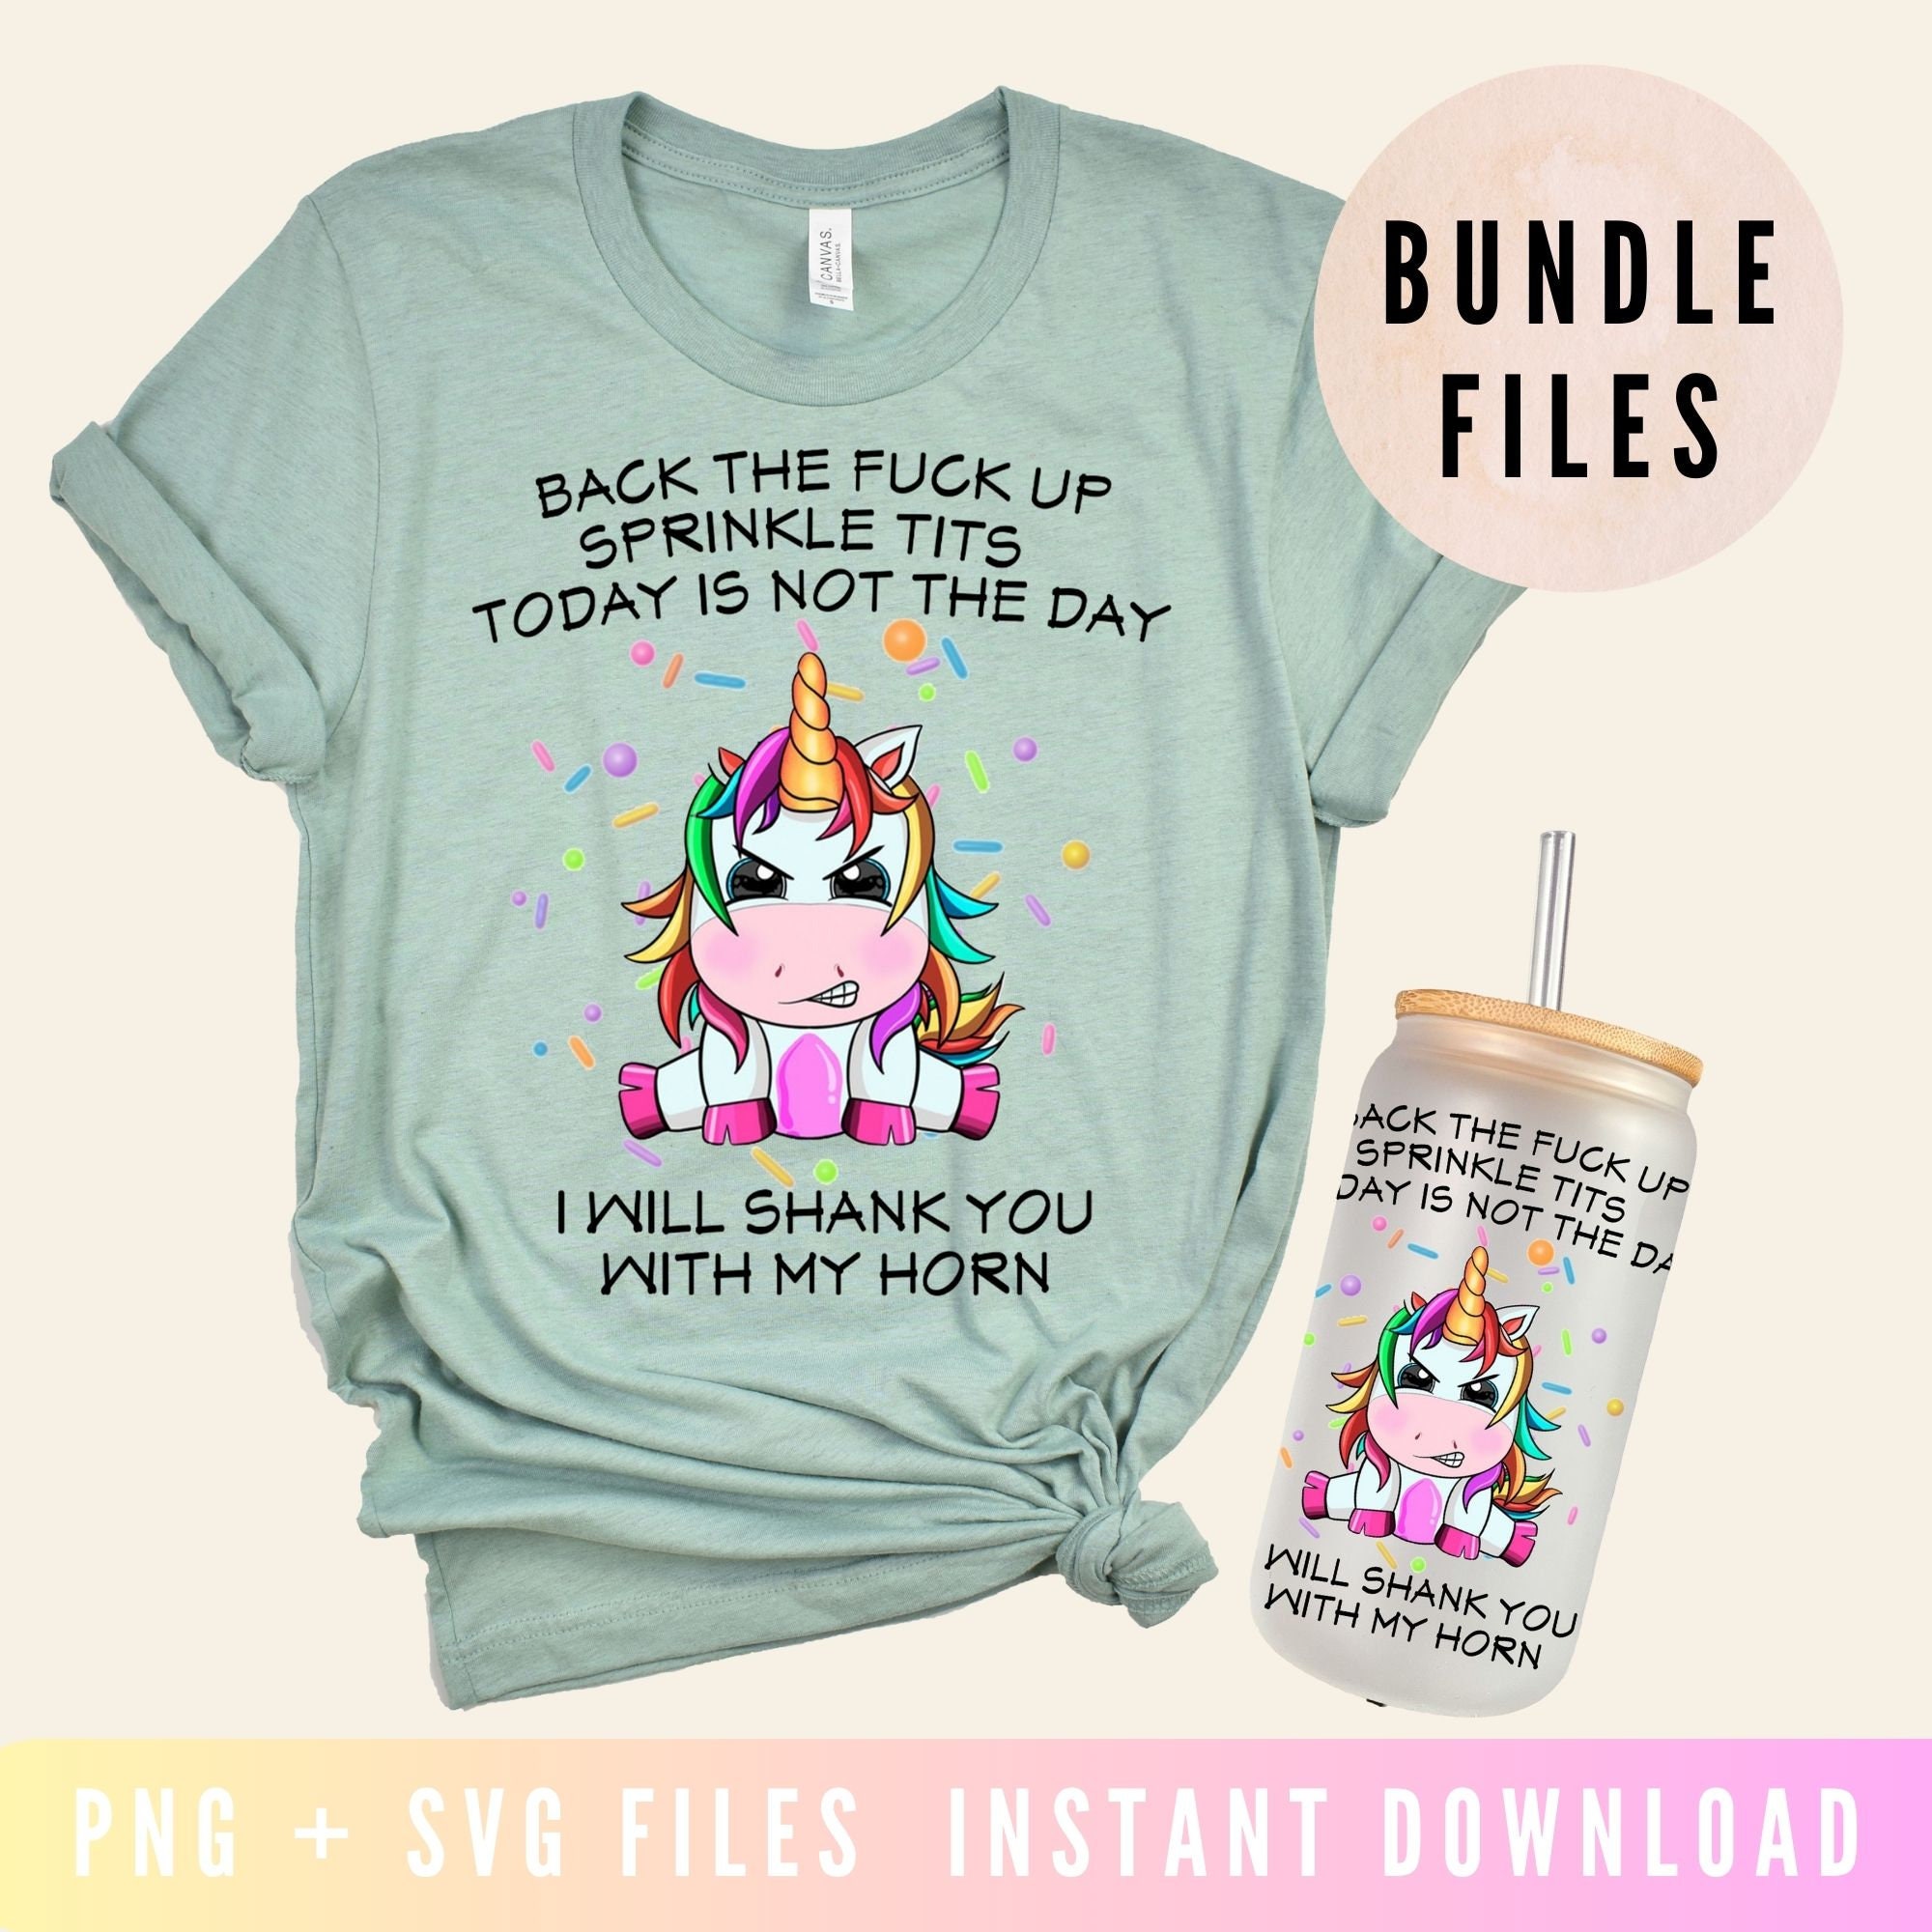 Back the Fuck up Sprinkle Tits Unicorn Cricut and Silhouette Vinyl Machine  Cut File SVG. Click for More Details 